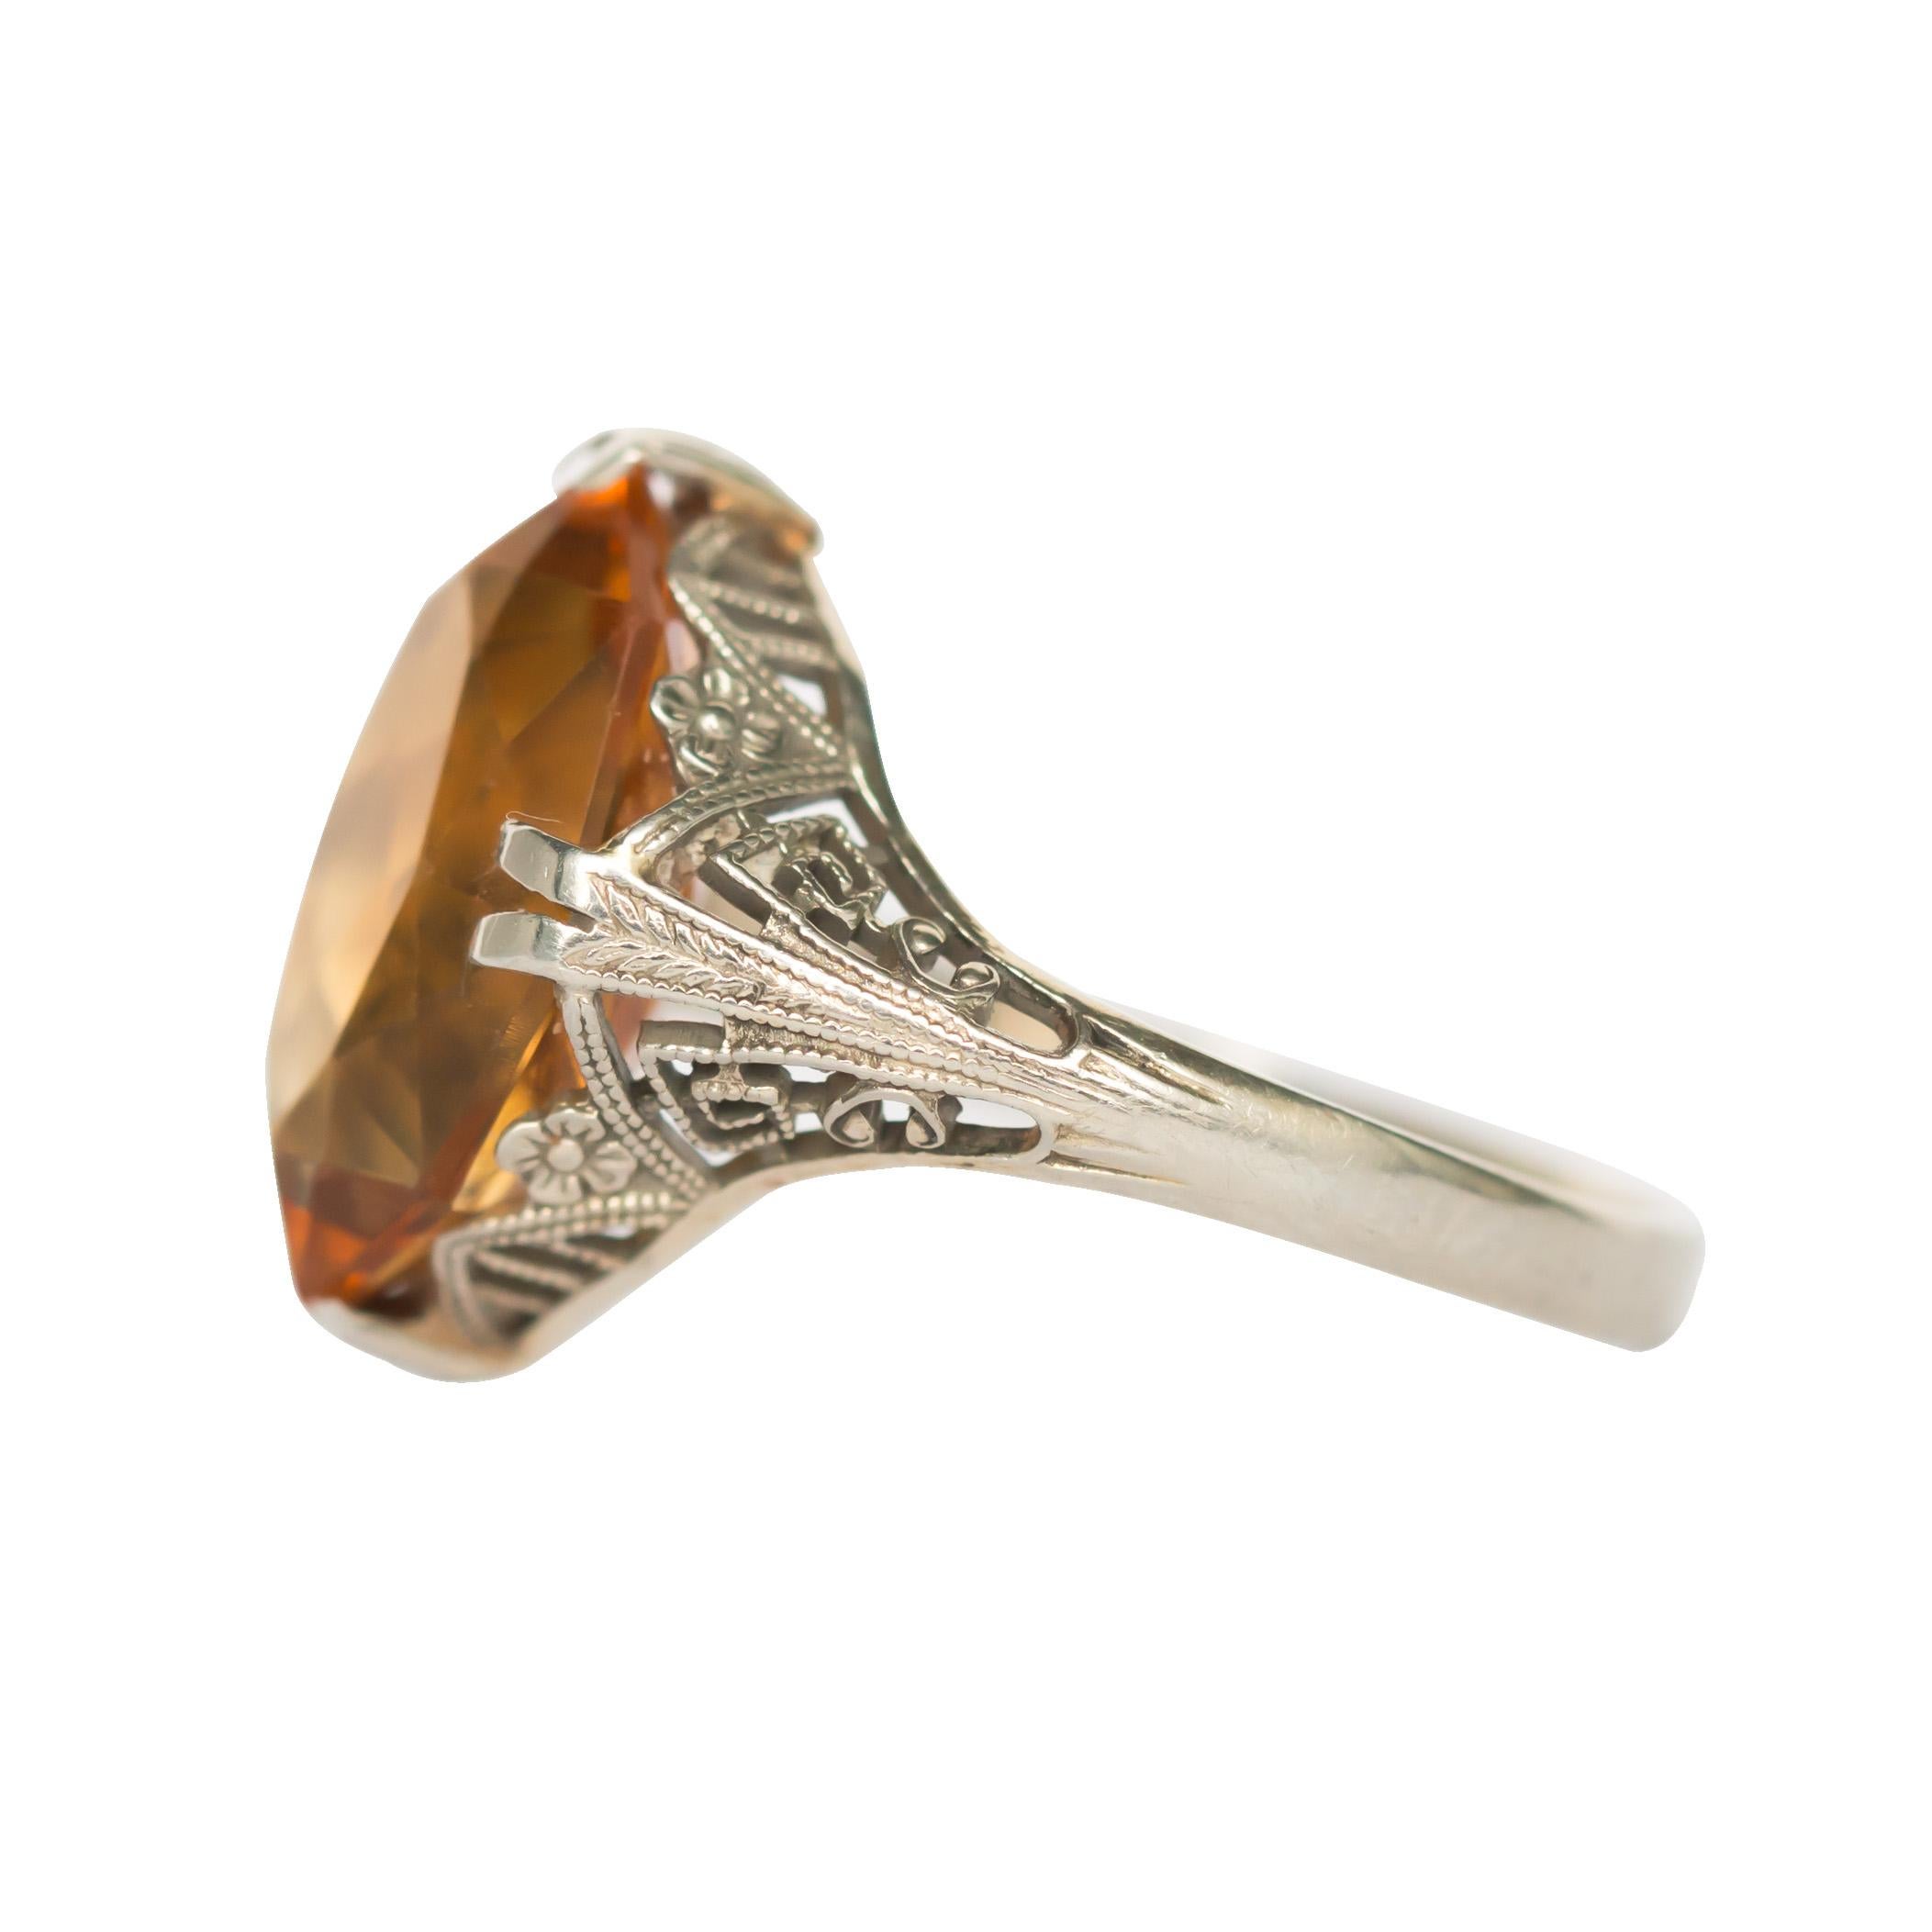 Ring Size: 8
Metal Type: 18 karat White Gold 
Weight: 3.2 grams

Color Stone Details: 
Type: Citrine
Shape: Marquise 
Carat Weight: ~4.00 carat
Color: Deep Orange Color 

Finger to Top of Stone Measurement: 5.05mm